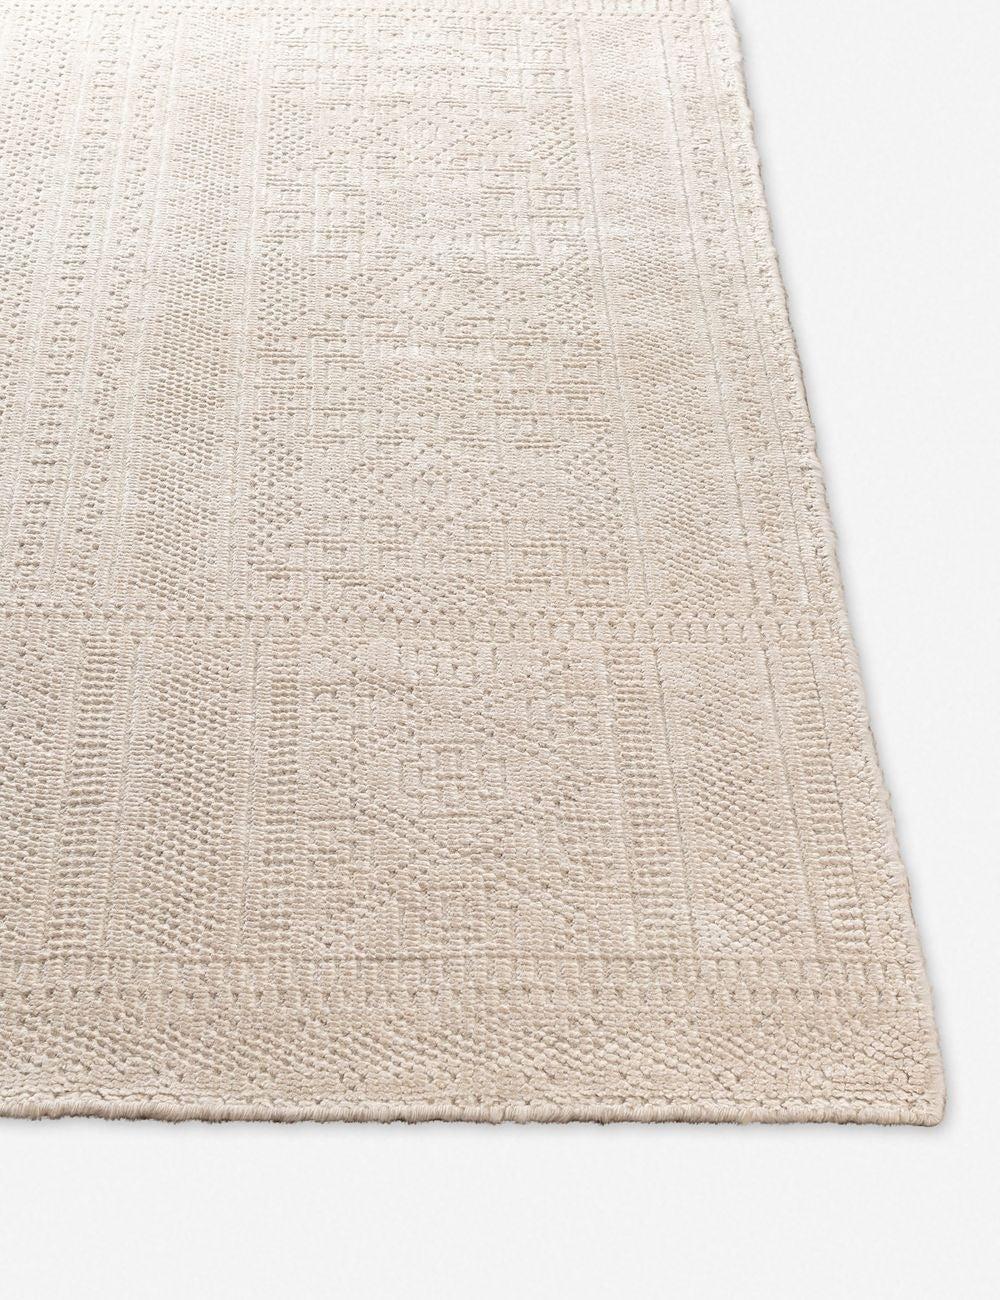 Elegant Gray Wool & Viscose Hand-Knotted 2'x3' Area Rug